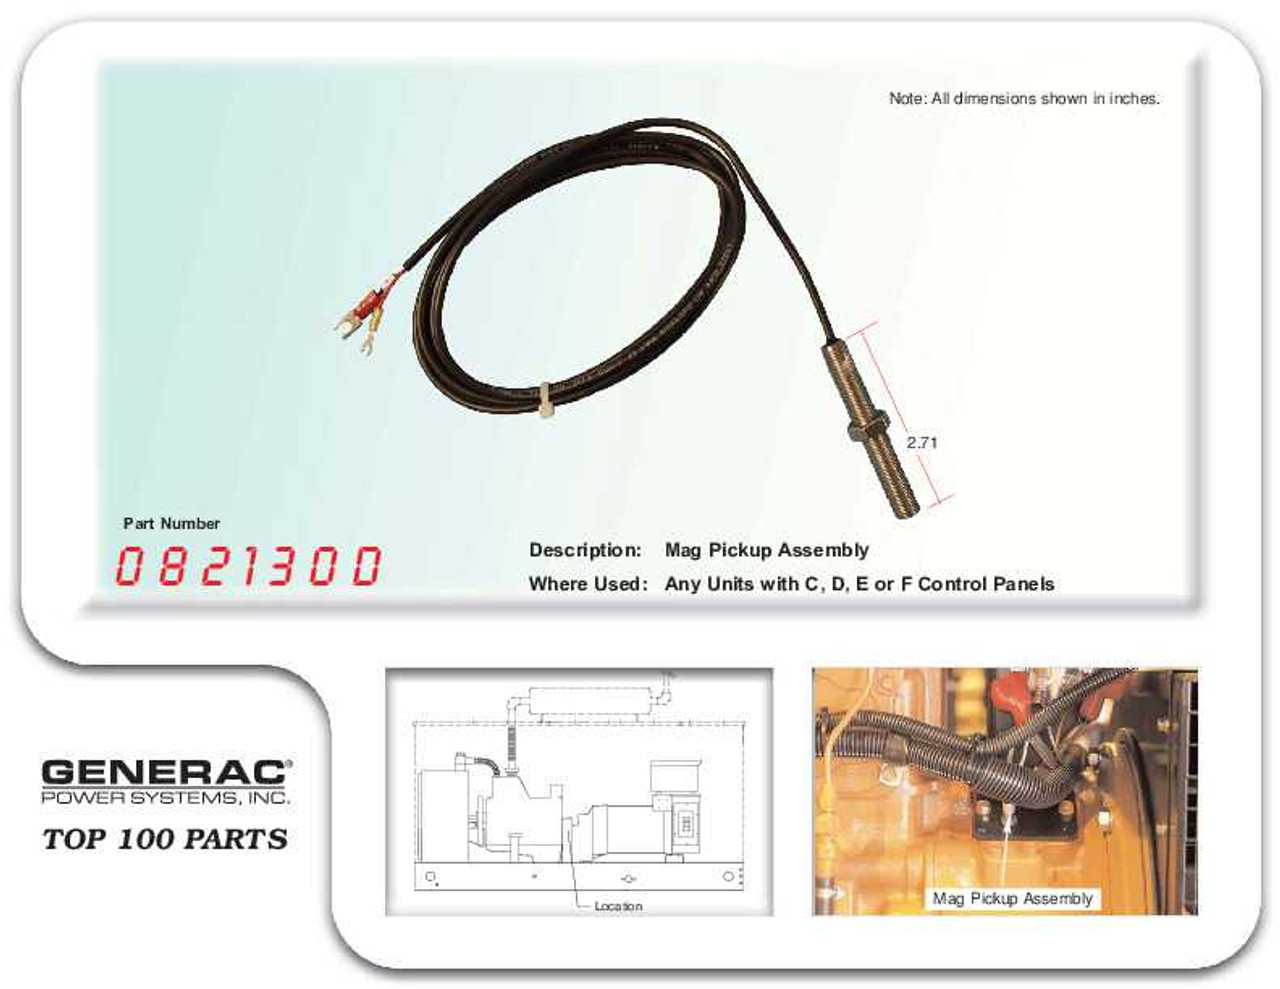 Generac 082130D 72" Mag Pickup Assembly with Diagram